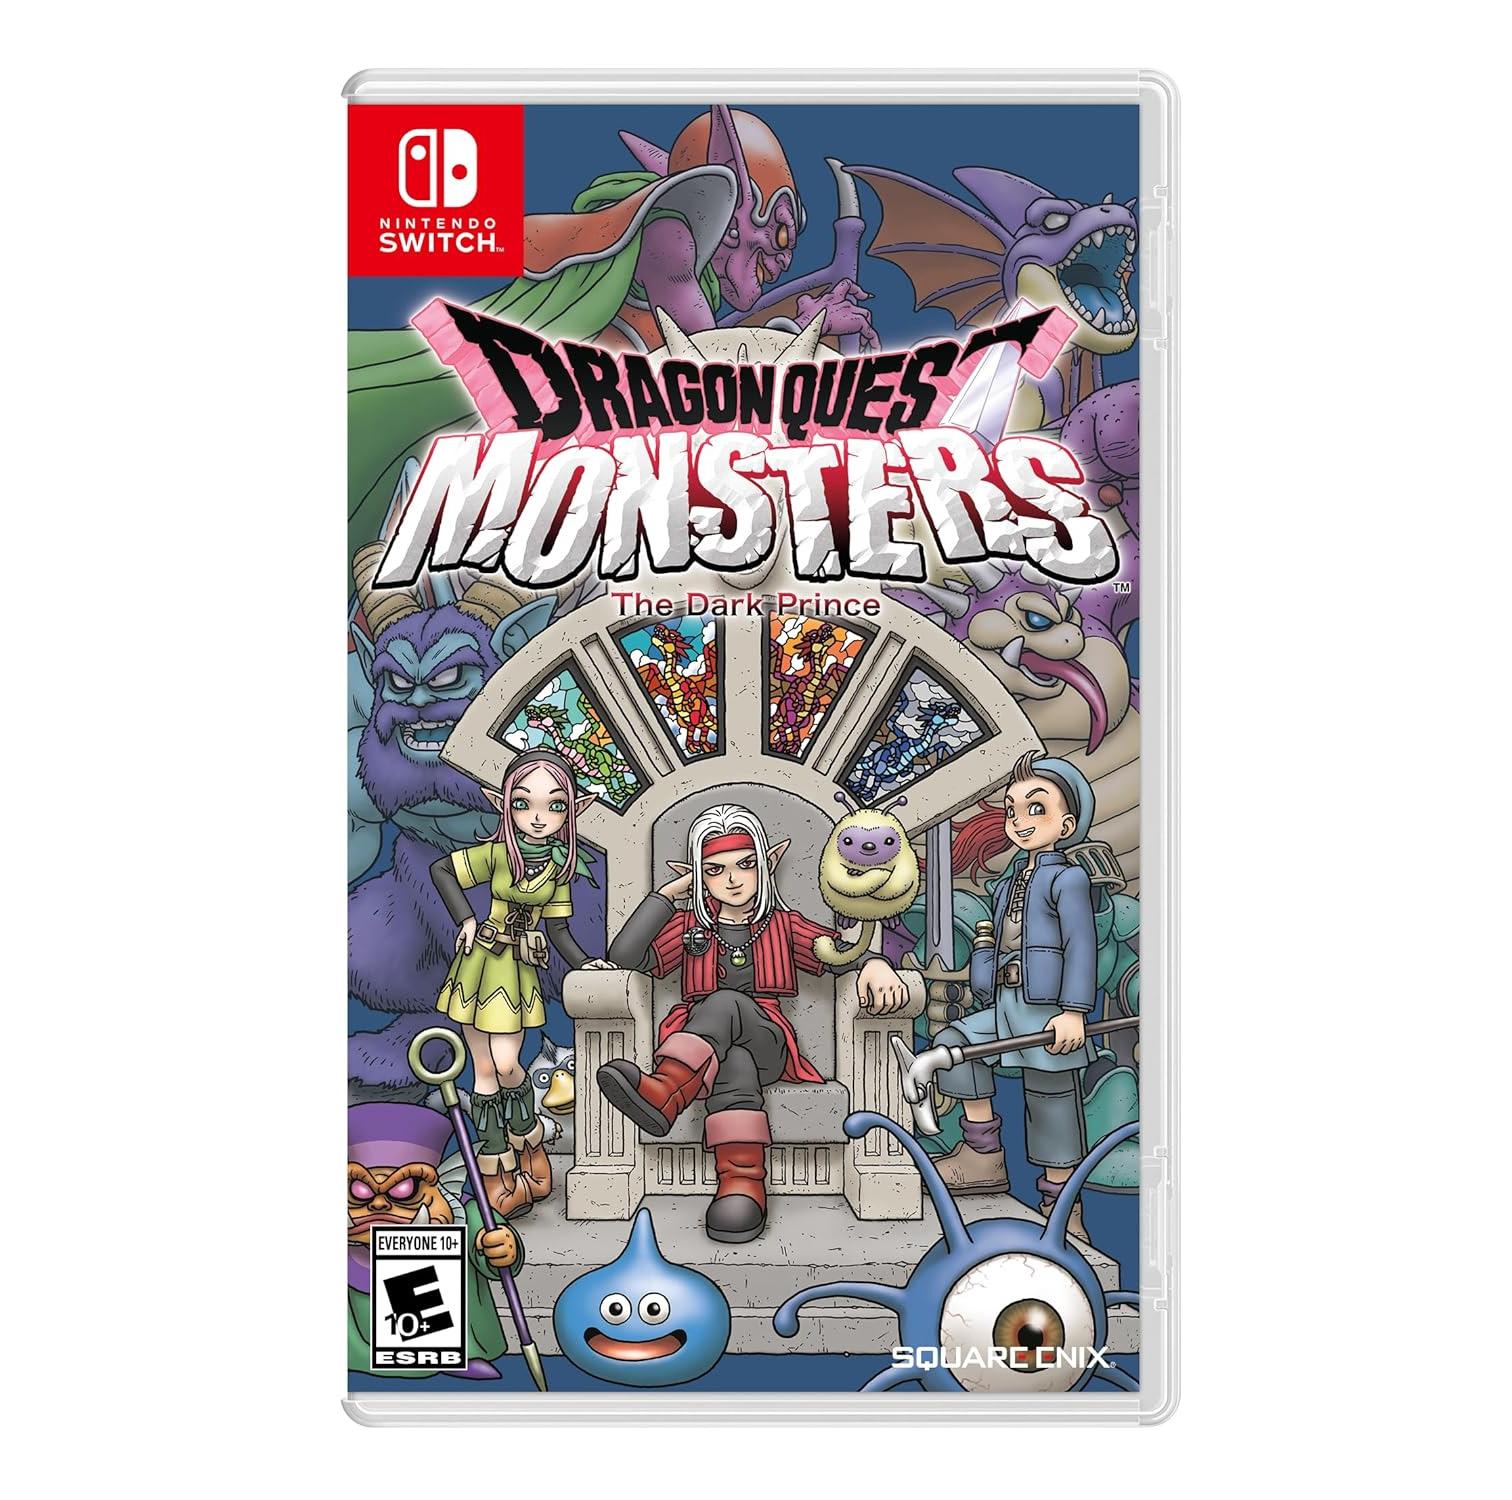 Dragon Quest Monsters The Dark Prince Nintendo Switch for $39.99 Shipped